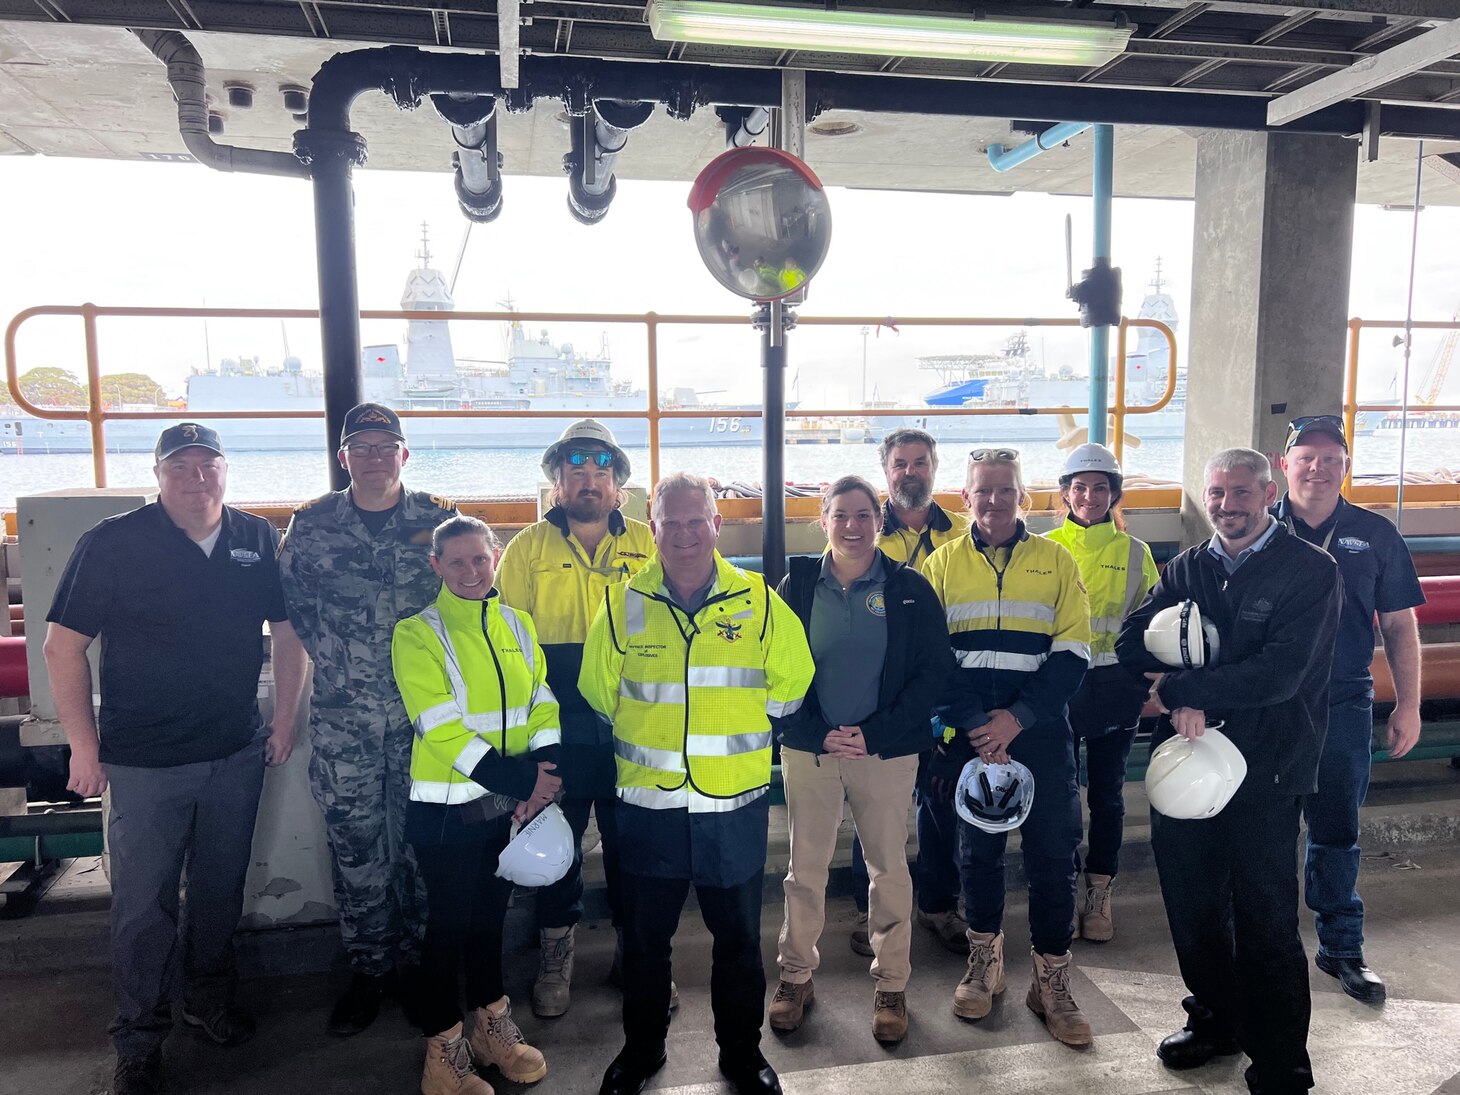 Marc Trei, left, and Mike Williams, right, from Naval Undersea Warfare Center (NUWC) Division, Keyport’s Countermeasure In-Service Engineering Agents (ISEA), pose for a photo with personnel from the Royal Australian Navy Submarine Force, explosive ordnance support personnel from Thales Australia, and Joint Explosive Ordnance Support-Western Australia personnel at HMAS Stirling Navy Base on Garden Island, Dec. 2. NUWC Keyport personnel were in Australia supporting the Virginia-class fast-attack submarine USS Mississippi (SSN 782) expeditionary reload training at HMAS Stirling to enhance interoperability and communication, and strengthen relationships with the Royal Australian Navy.